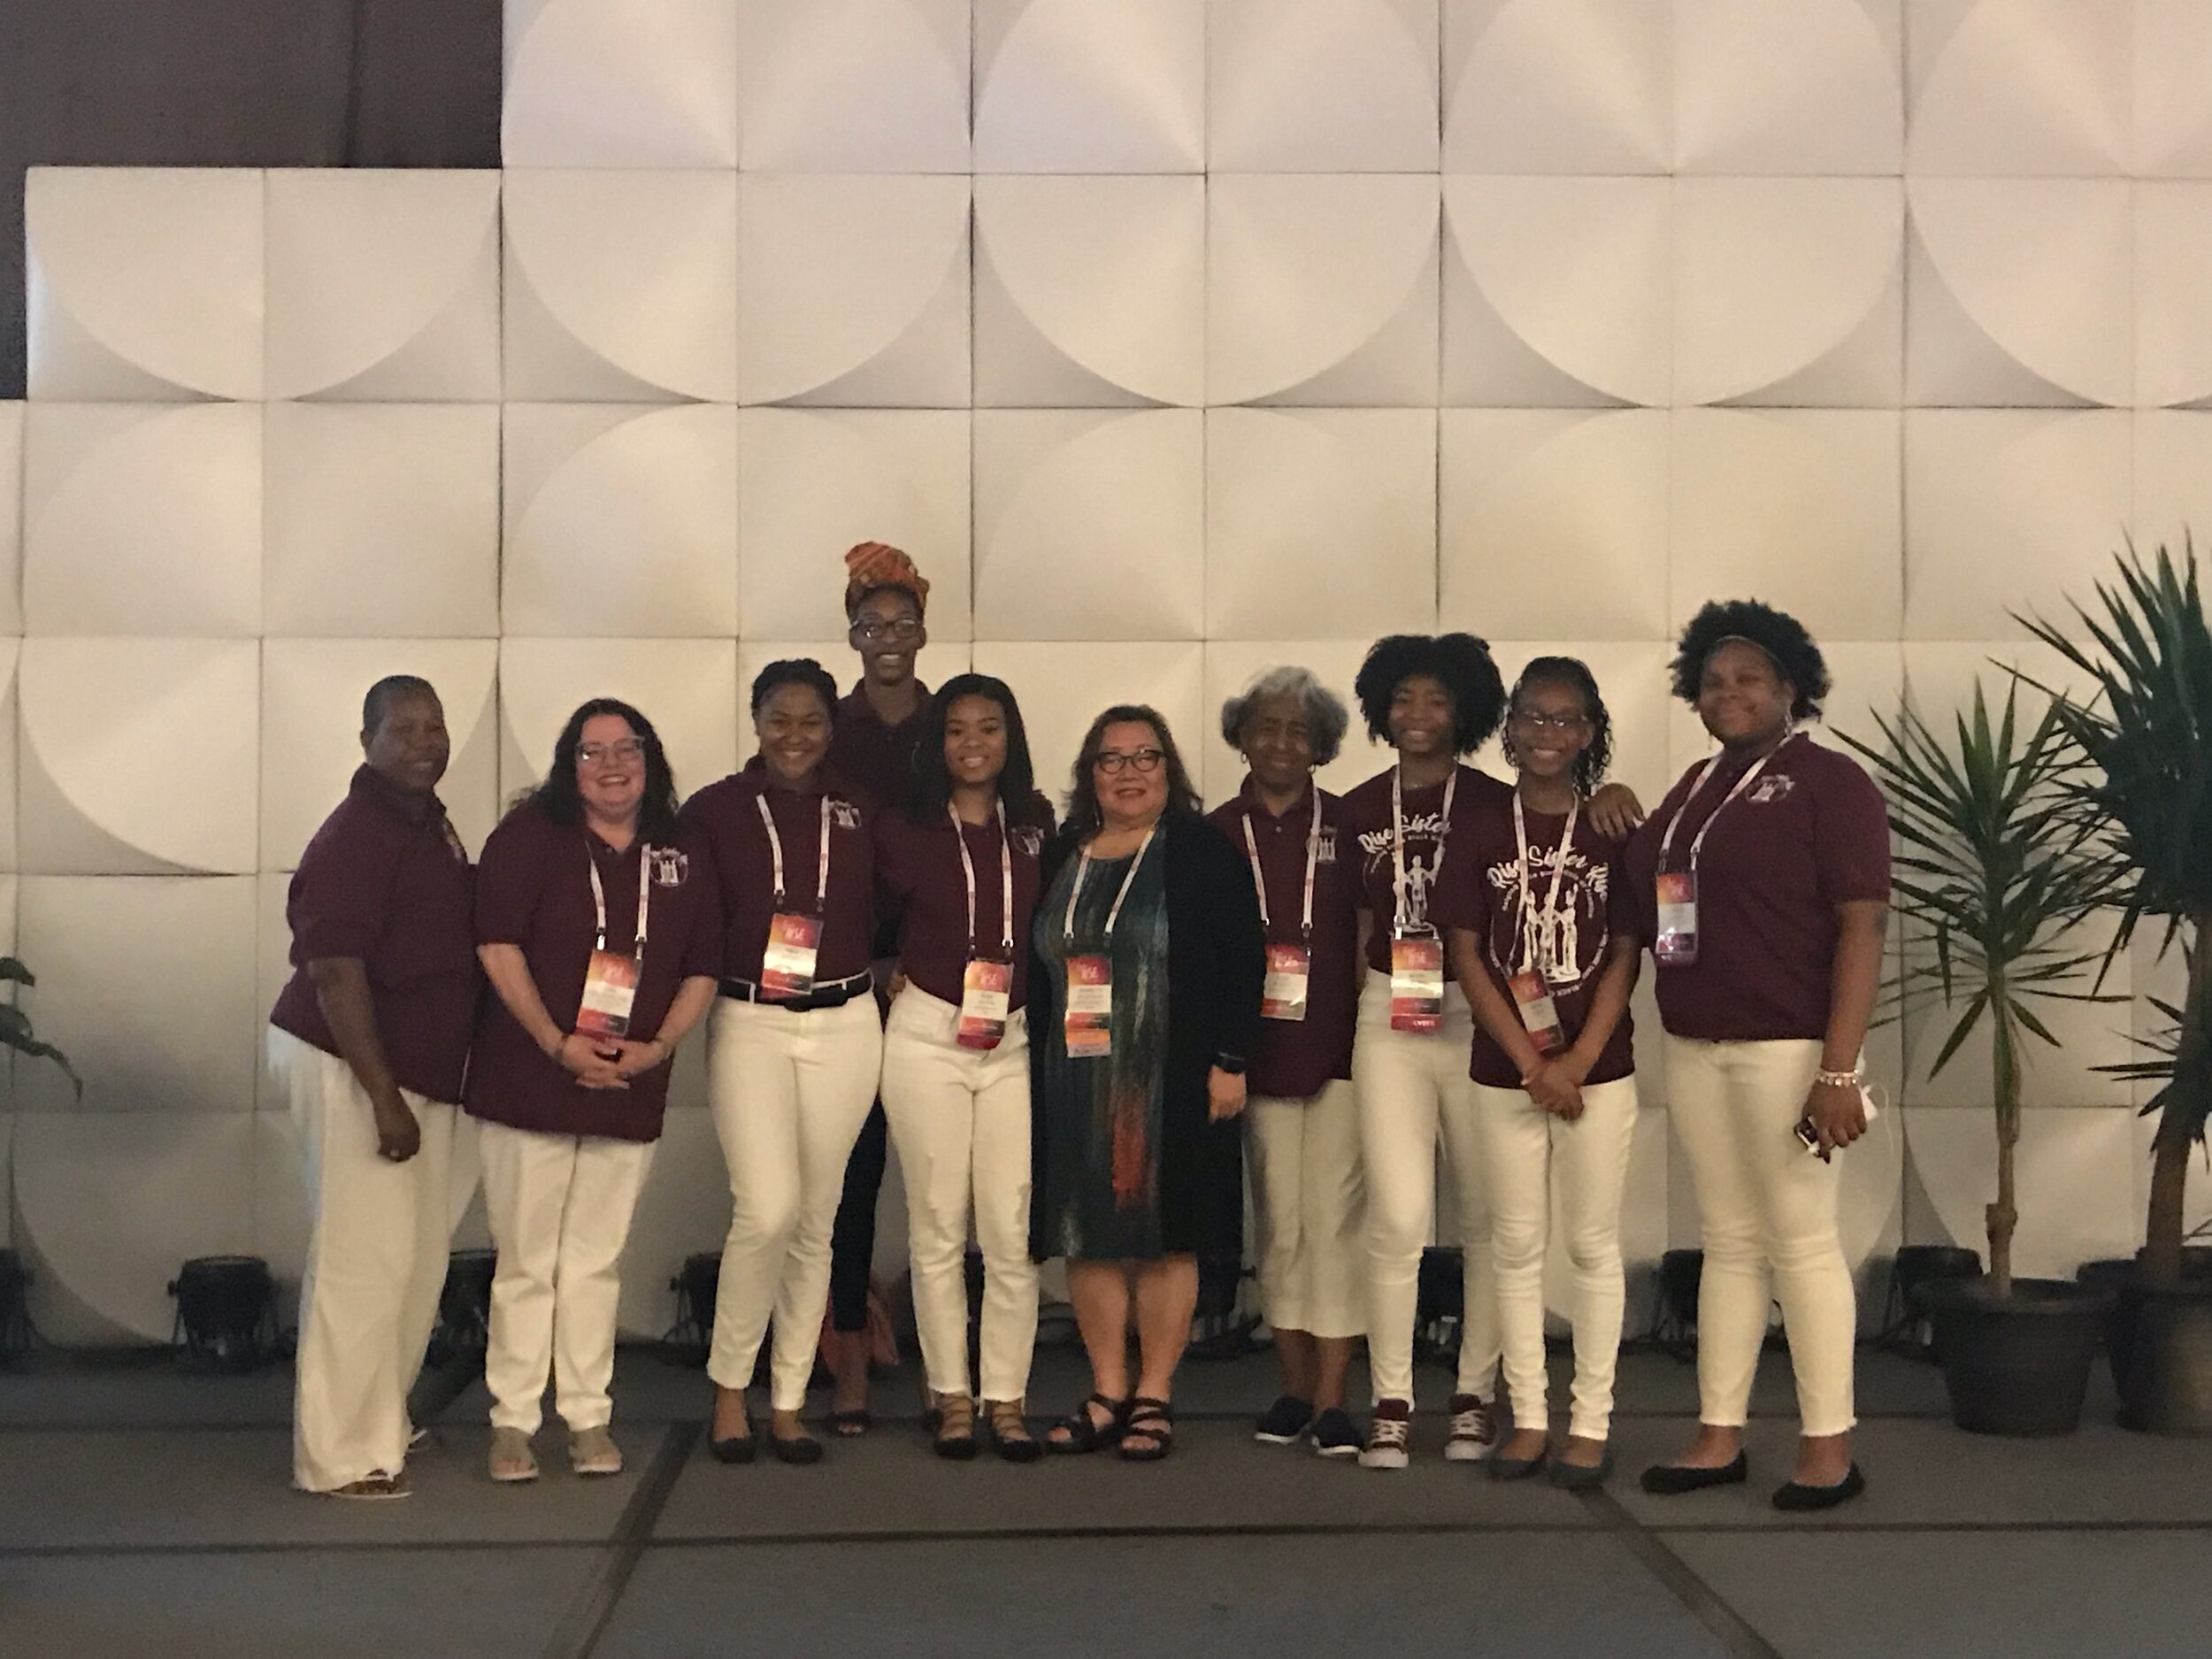  Rise Sister Rise Black Girl Think Tank members with the President and CEO of the National Crittenton Foundation, Jeannette Pai-Espinosa at the National In Solidarity Conference for Girls of Color in Atlanta, Georgia in May, 2019. The girls were invi